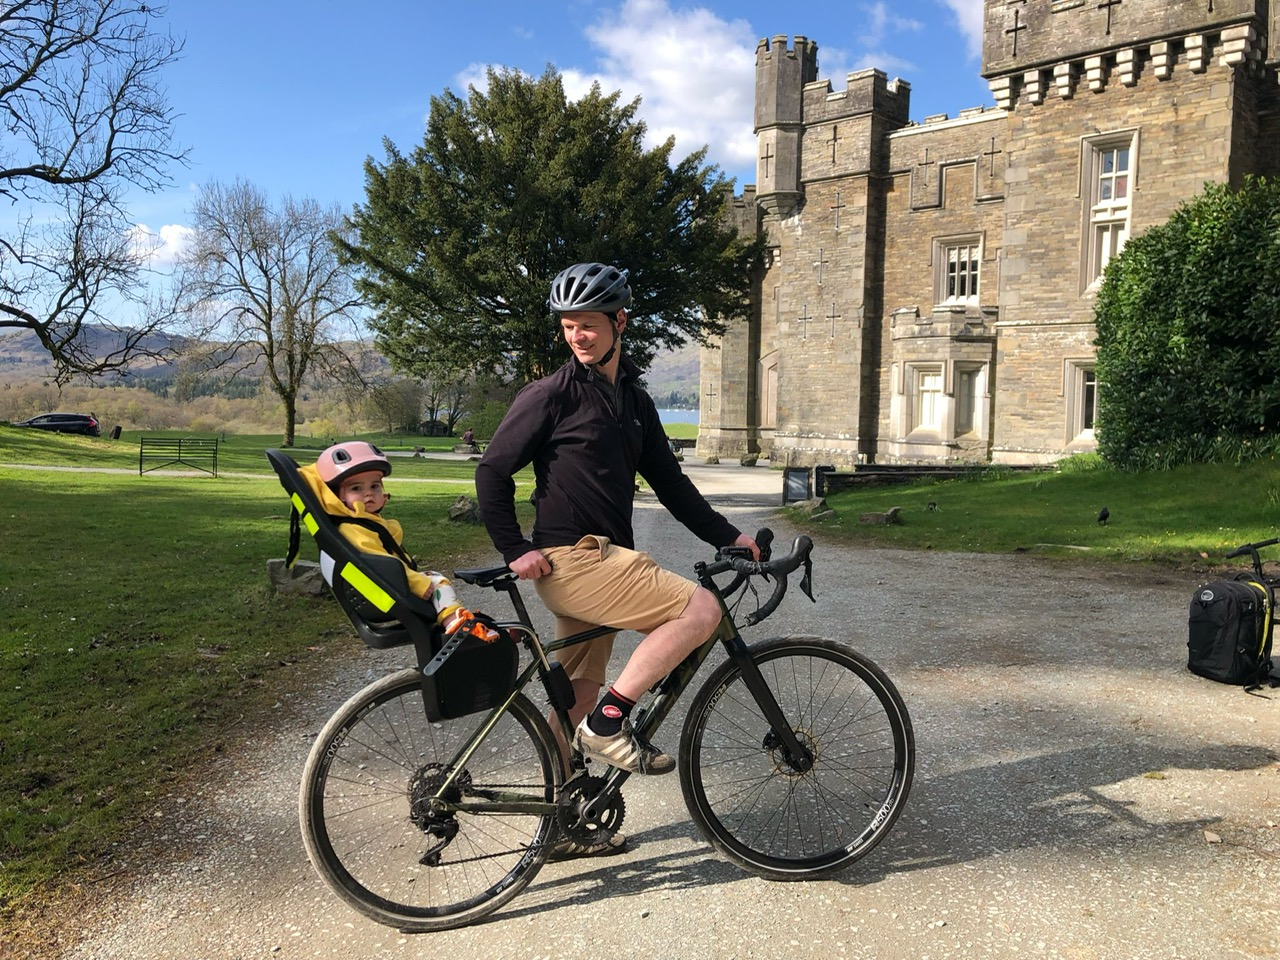 Dad and daugher on a bike ride in front of a castle